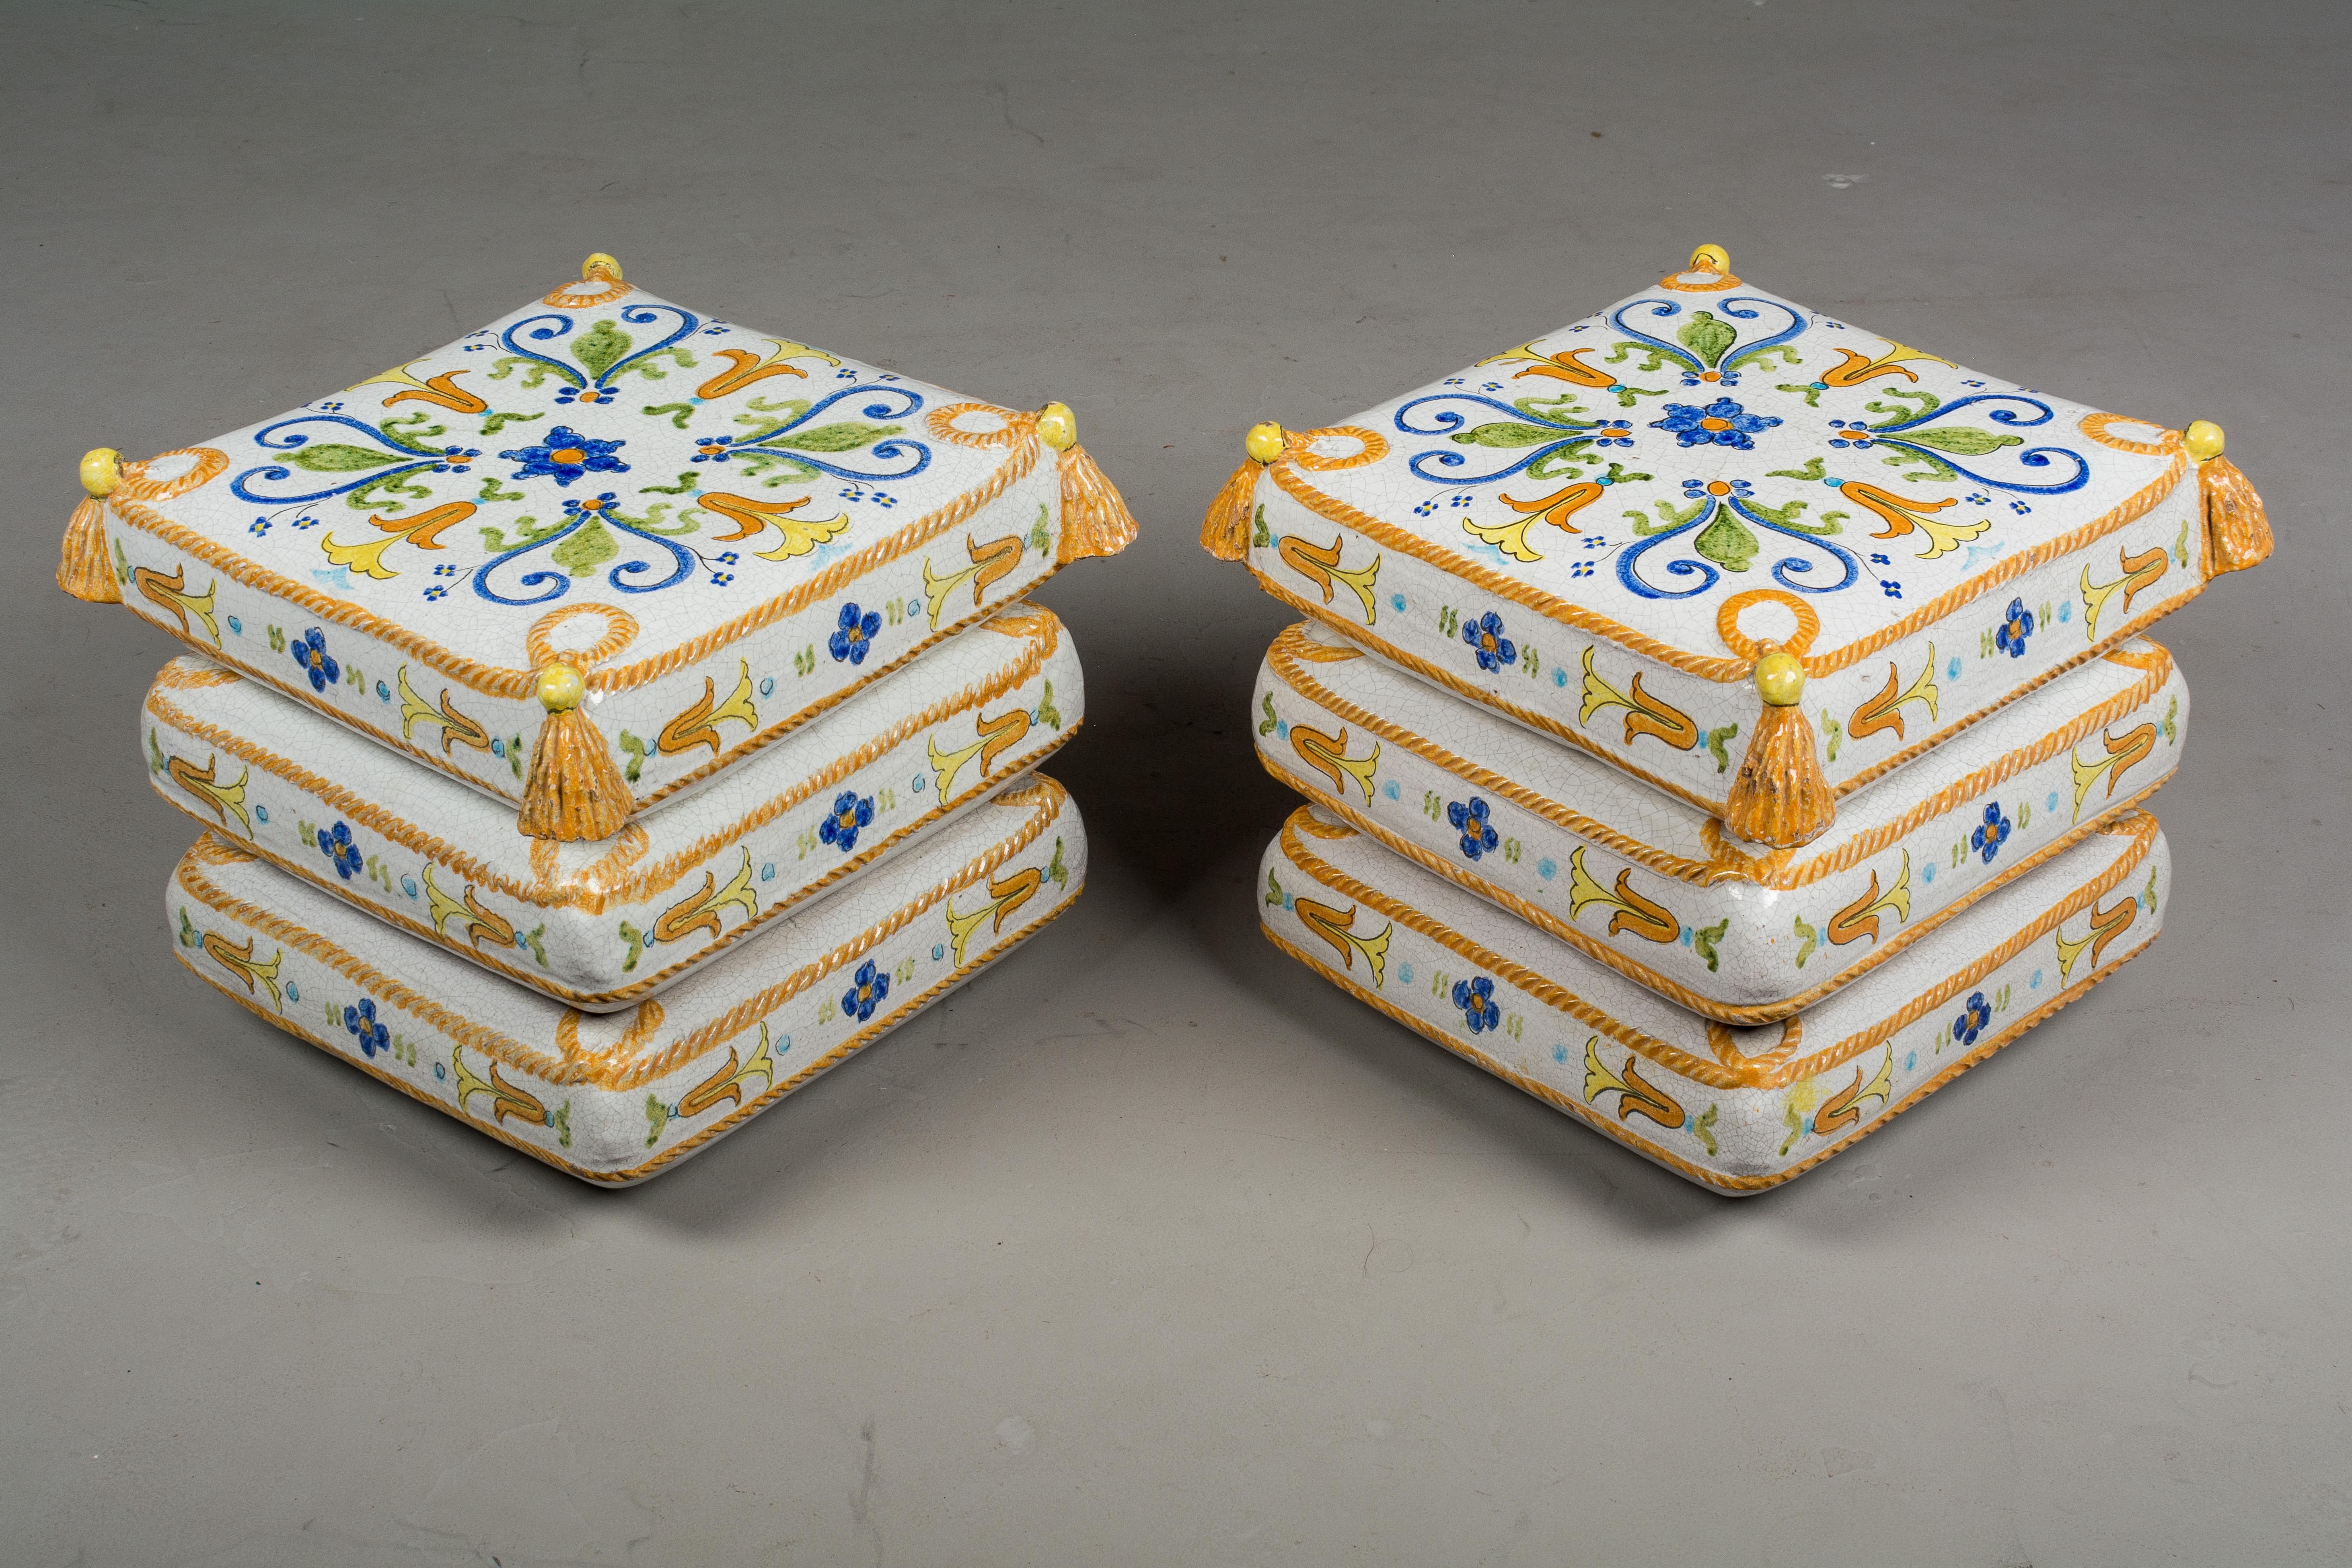 A pair of French ceramic garden stools, each made to look like a stack of three upholstered cushions with rope trim and tassels. White craquelure glazed ground with hand painted floral decoration in bright blue, yellow, green and gold. Each weights